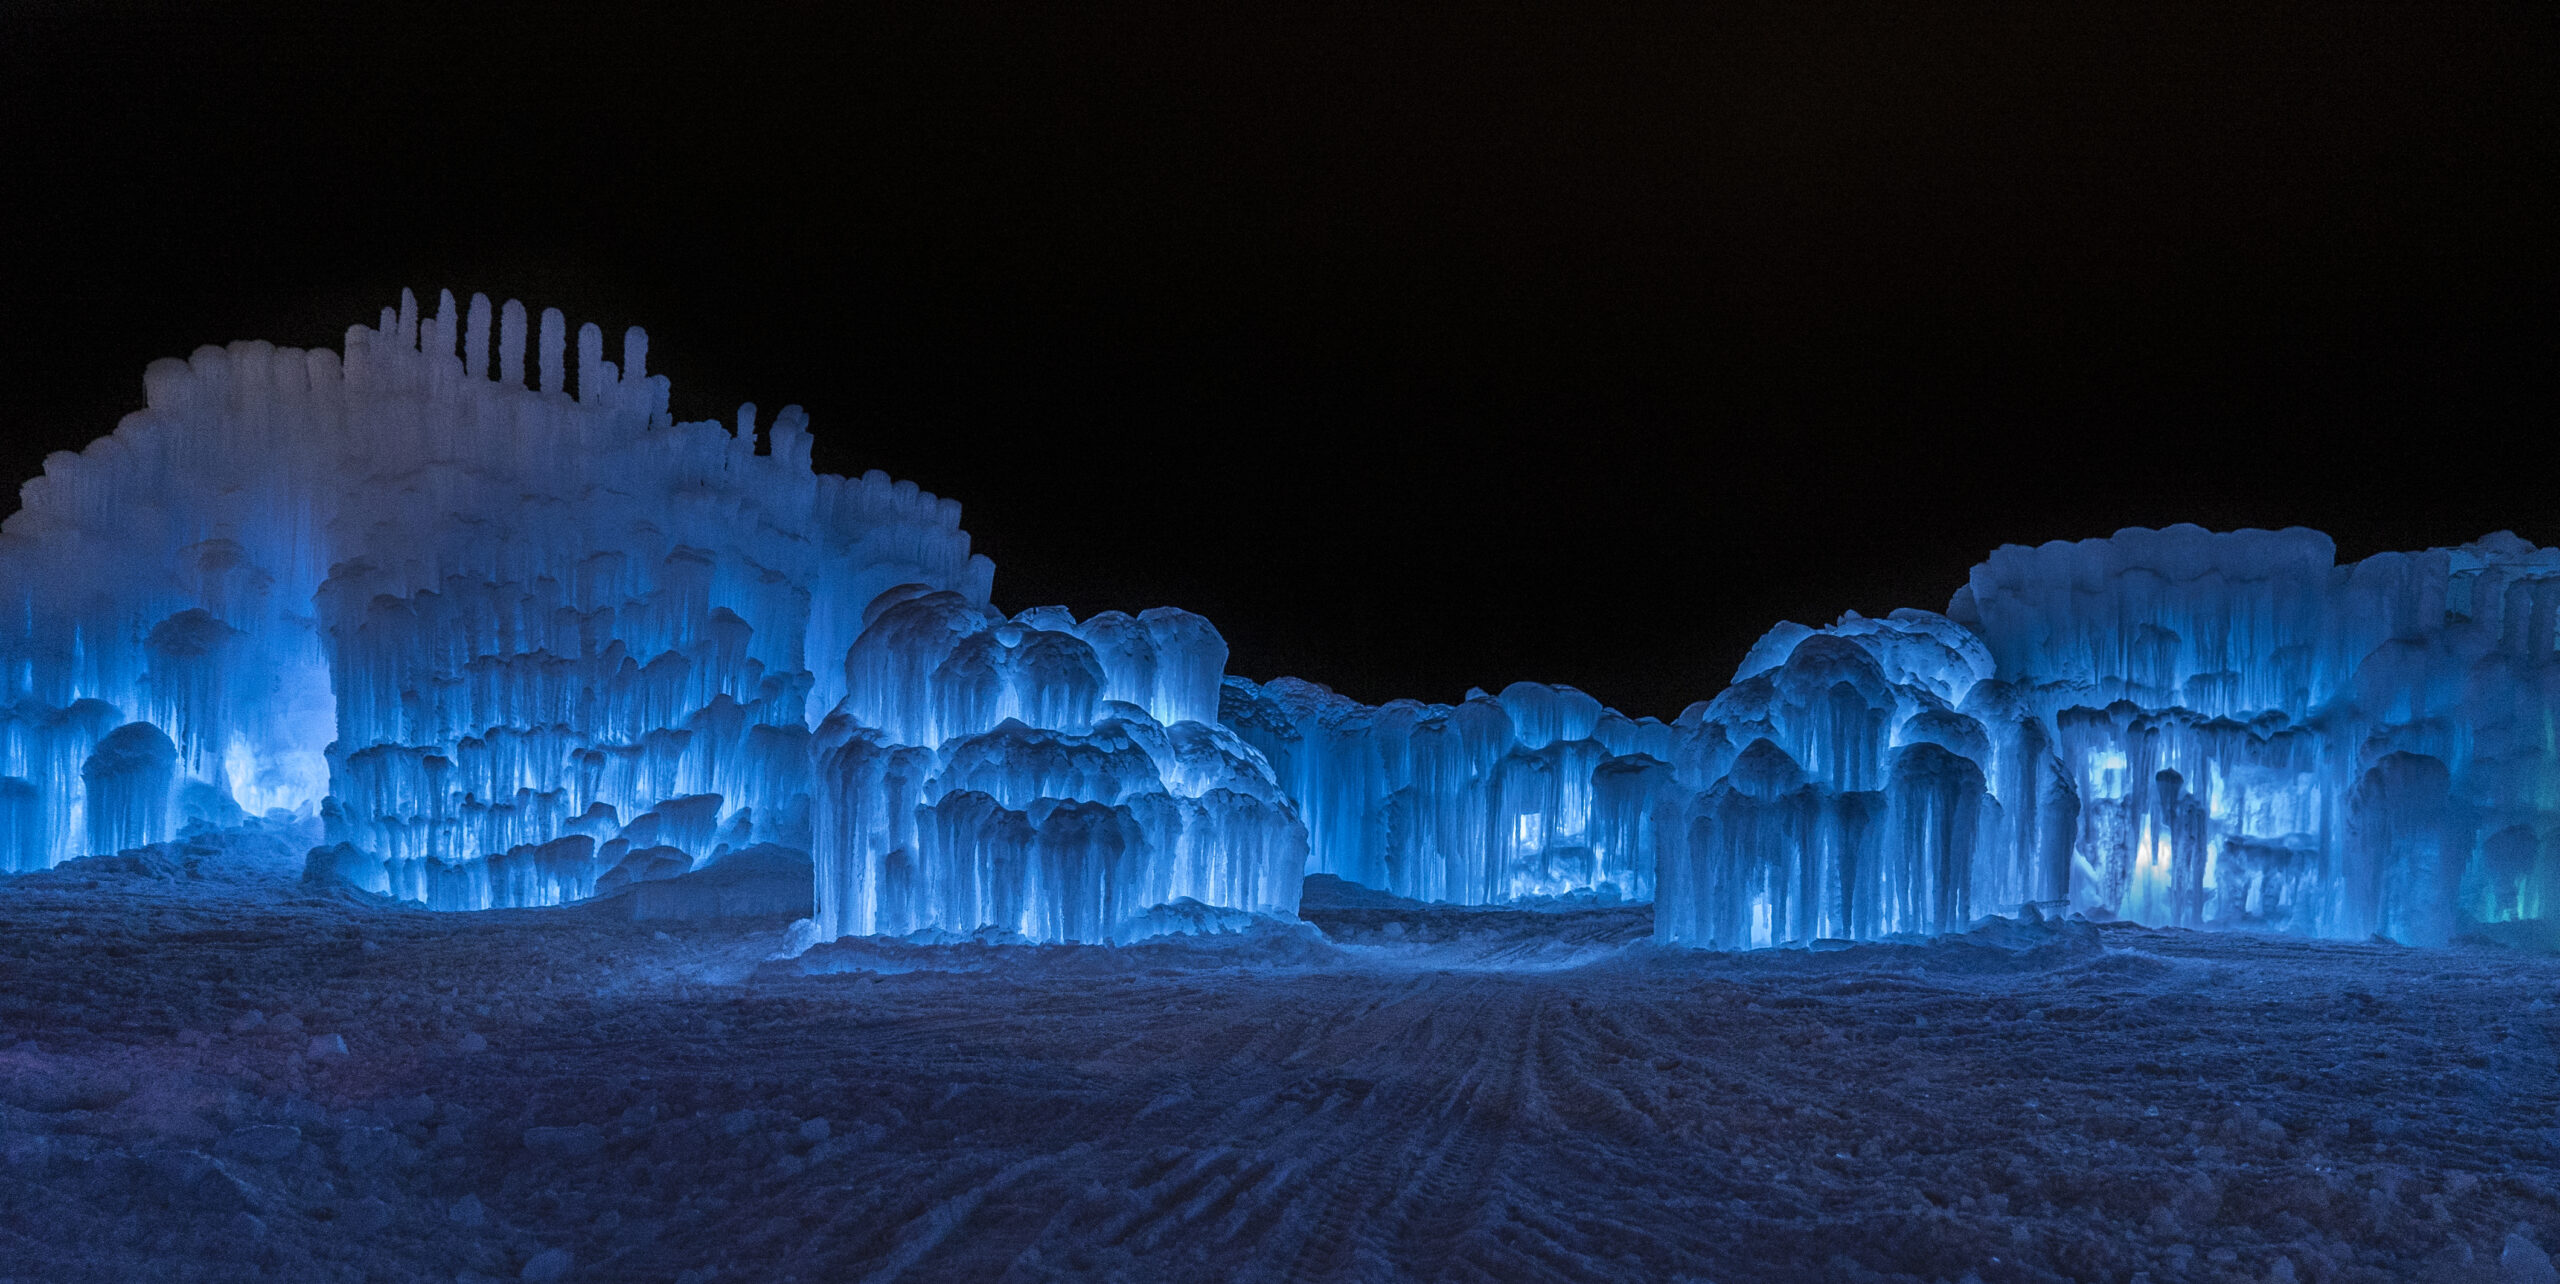 Ice Castles and the Lincoln Village Shops